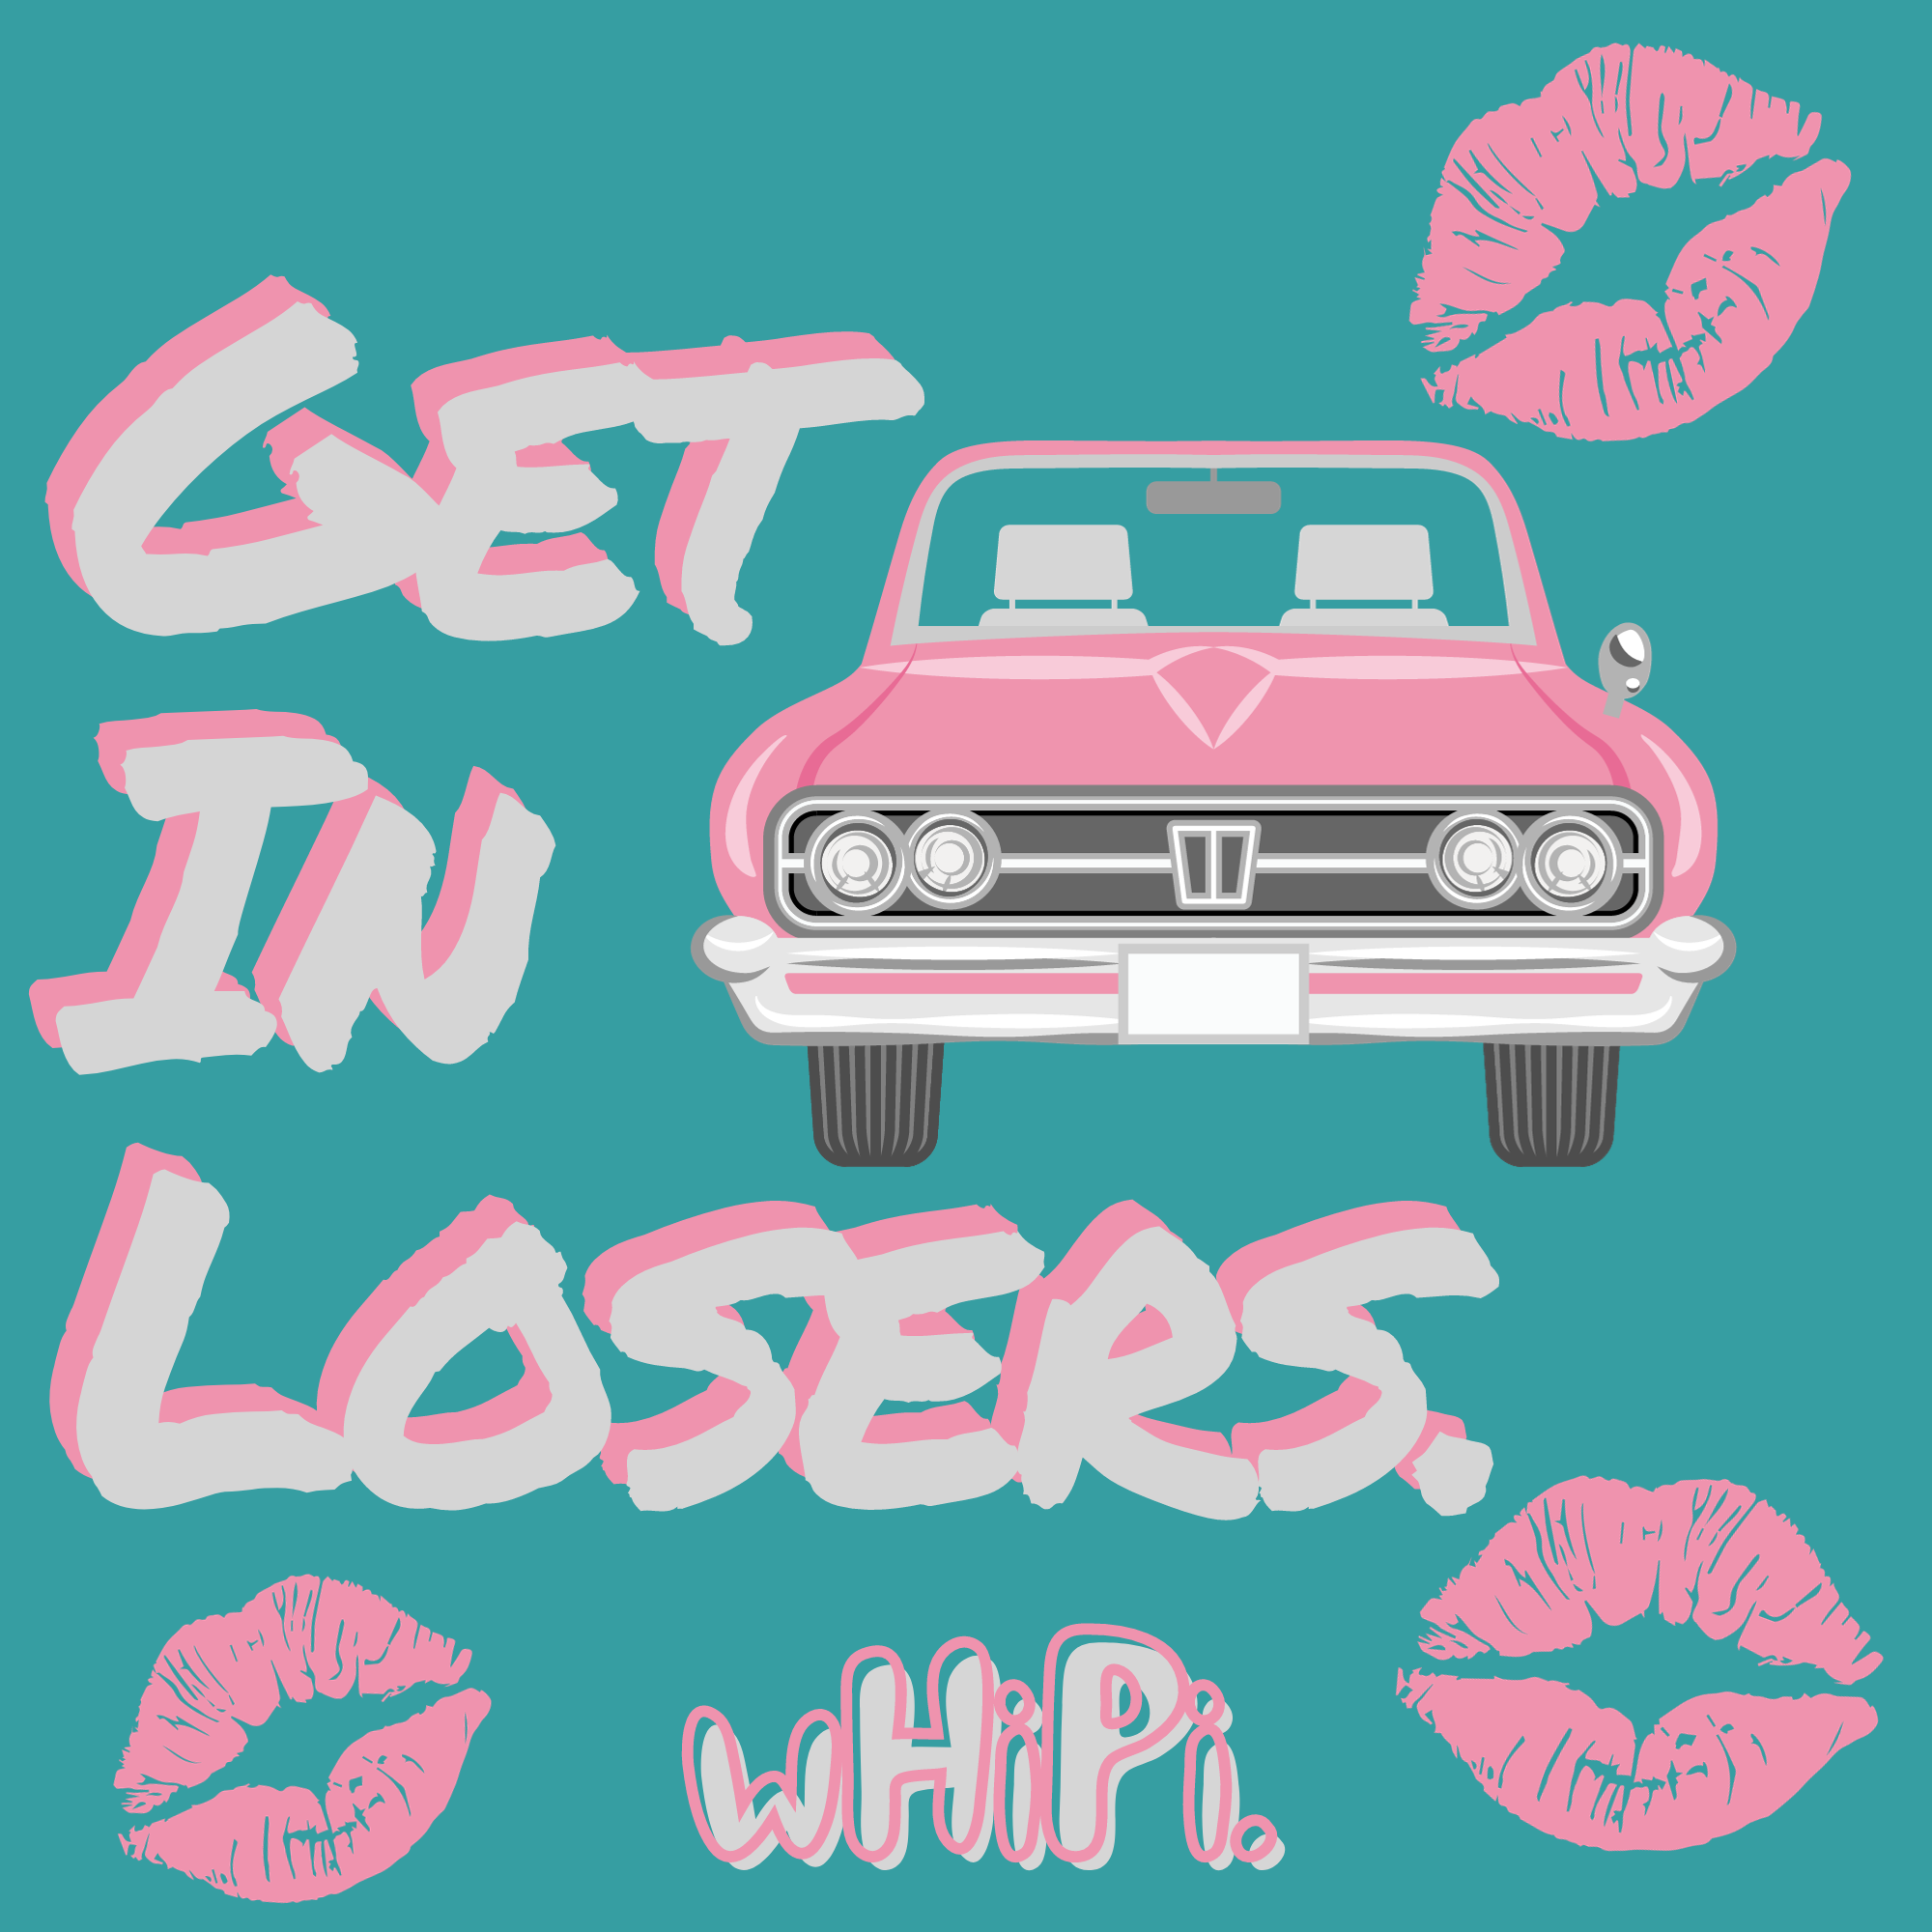 Get In losers Jewelry – Whipi Co